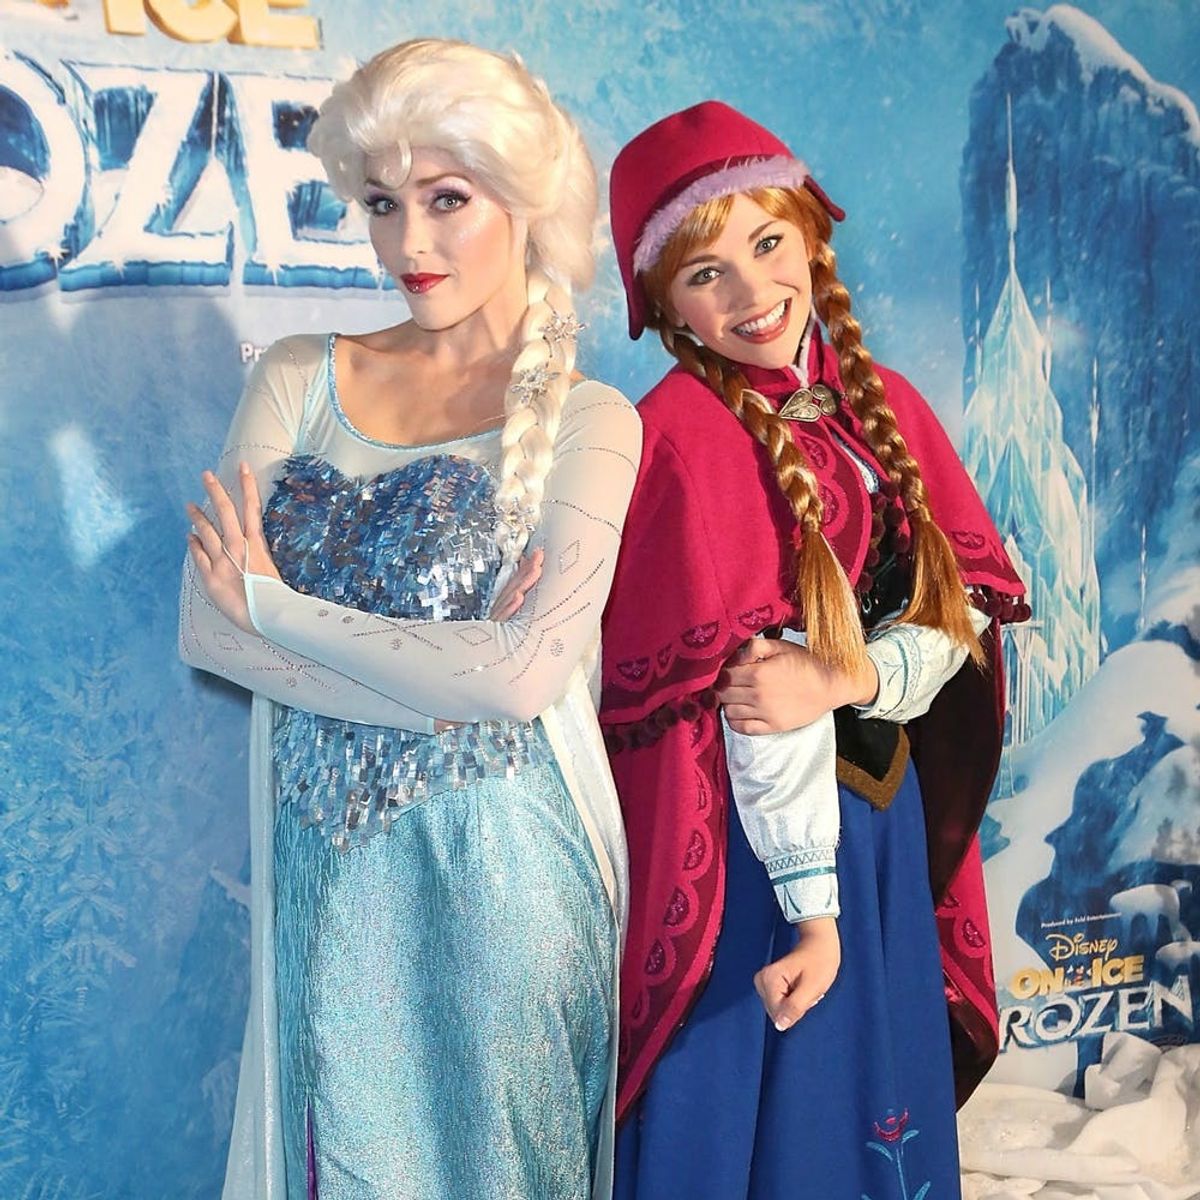 This Group of Students Gifted a Little Girl With the Sweetest Frozen-Themed Surprise Ever